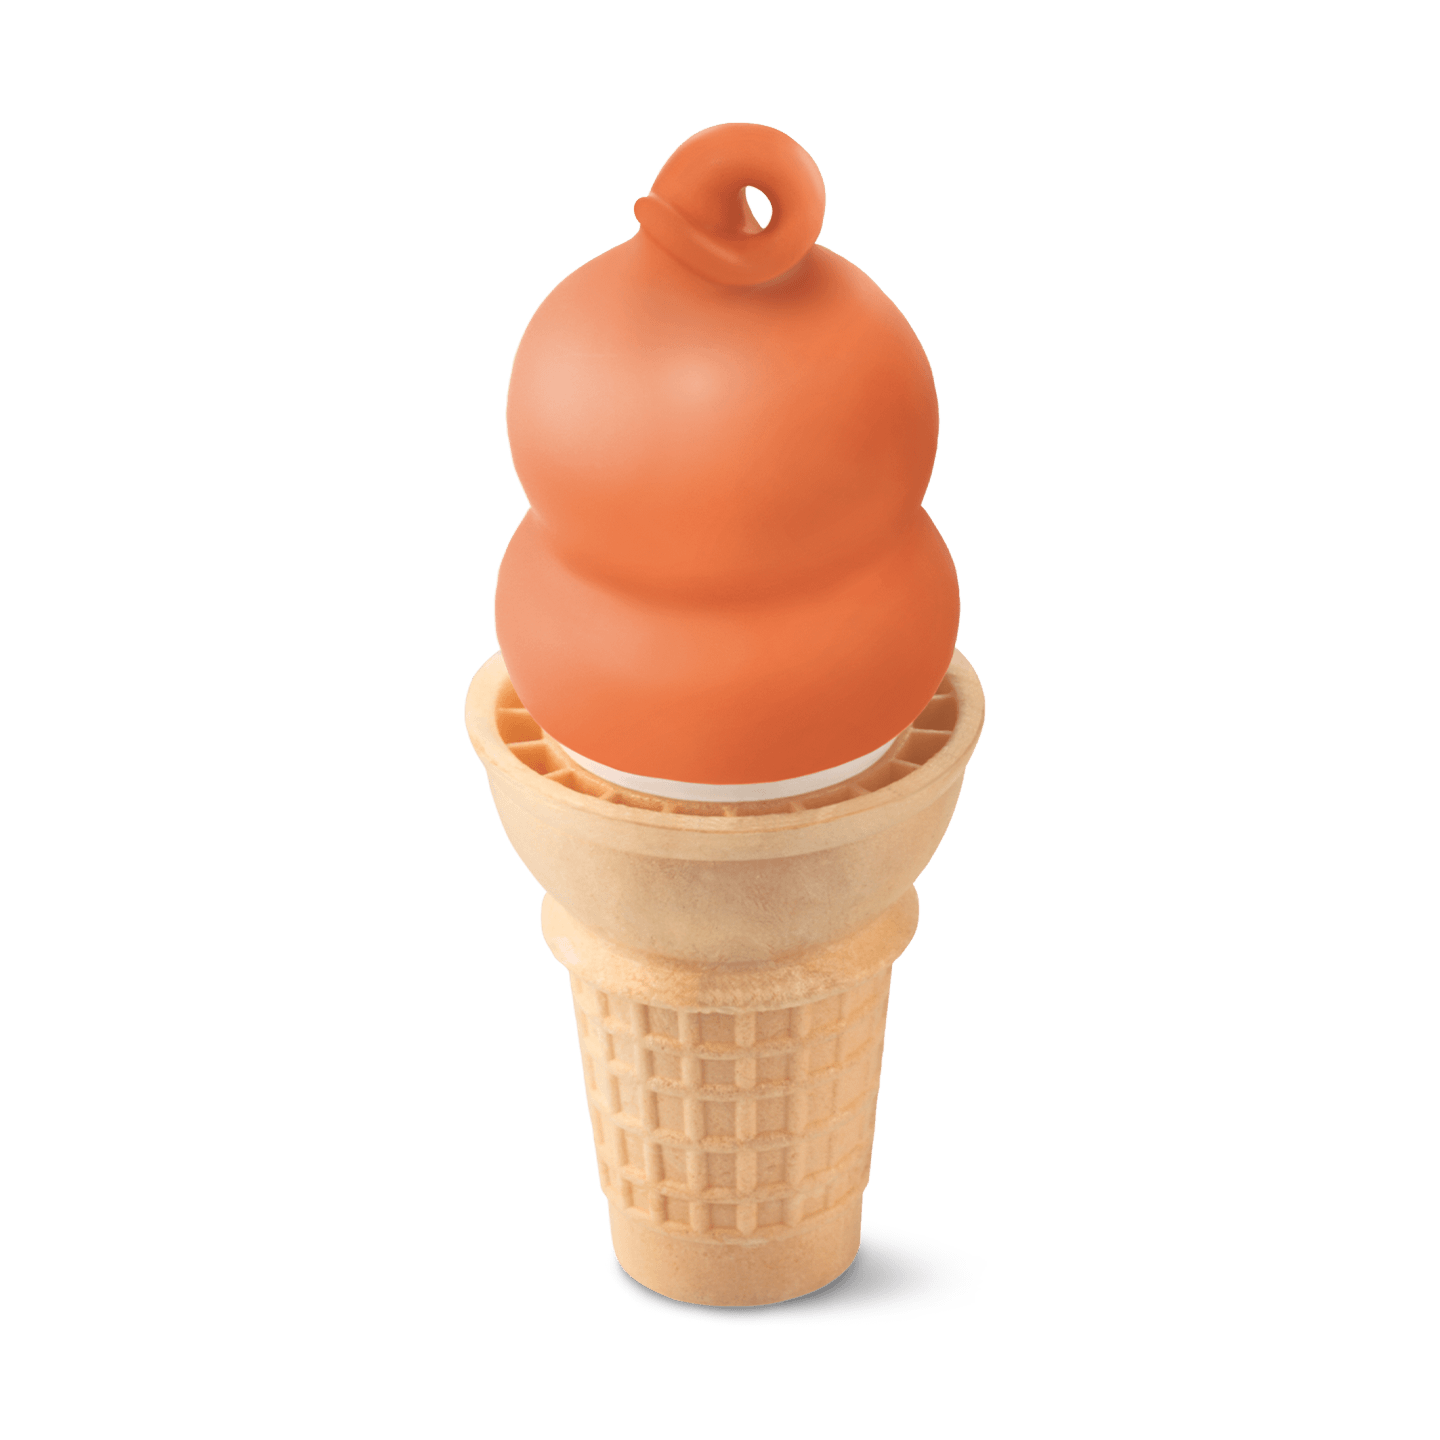 Dairy Queen Small Dreamsicle Dipped Ice Cream Cone Nutrition Facts